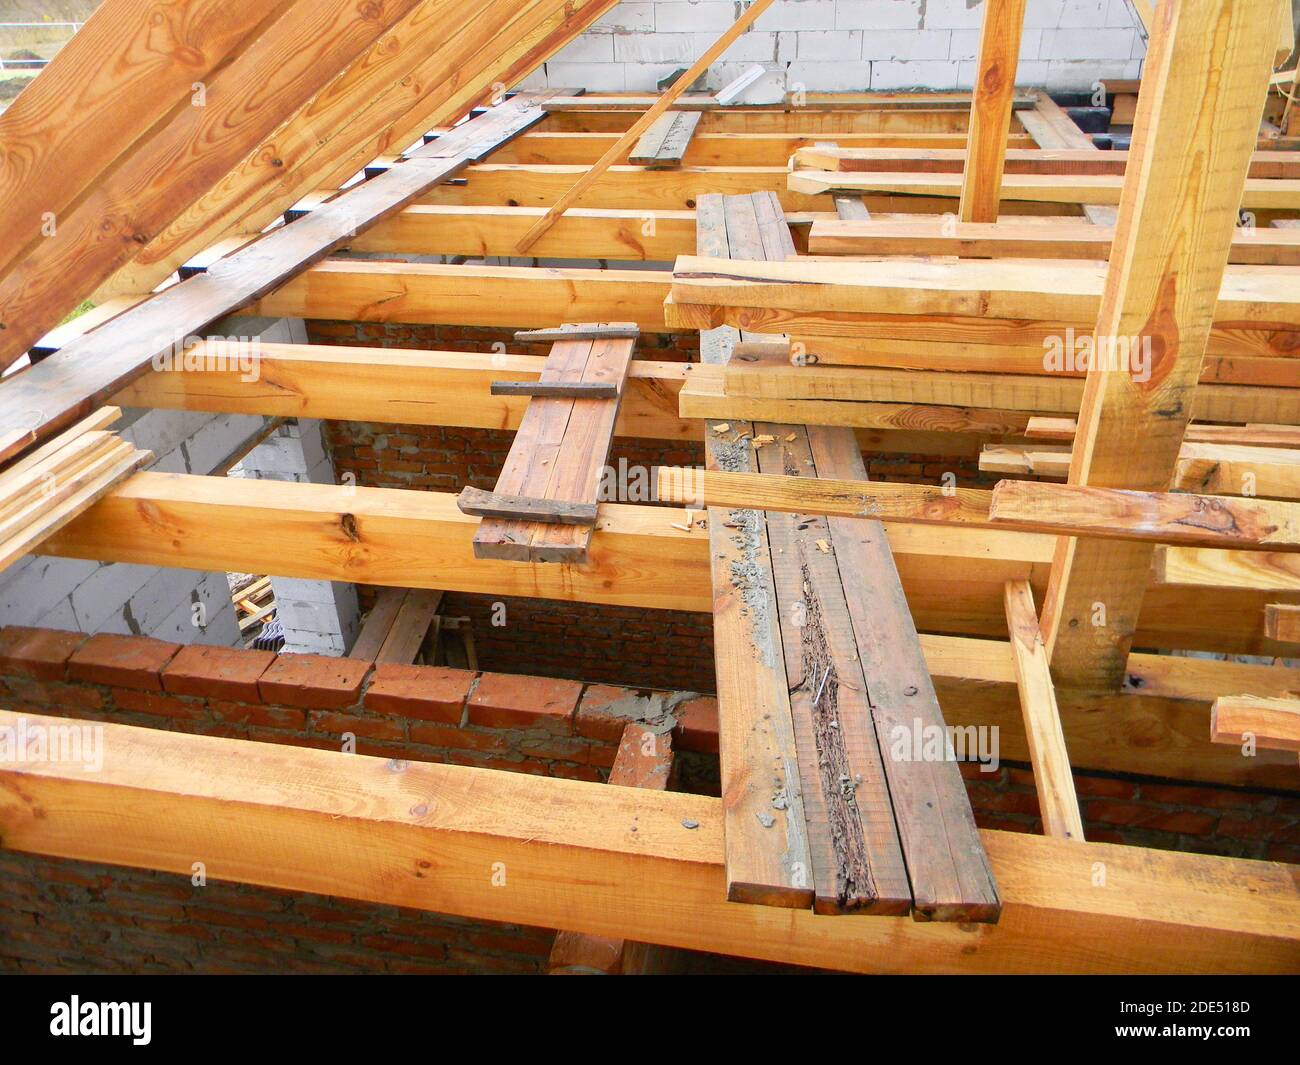 Unfinished attic house roofing construction with trusses, wooden beams, eaves, timber.  House roof wooden frame construction. Stock Photo